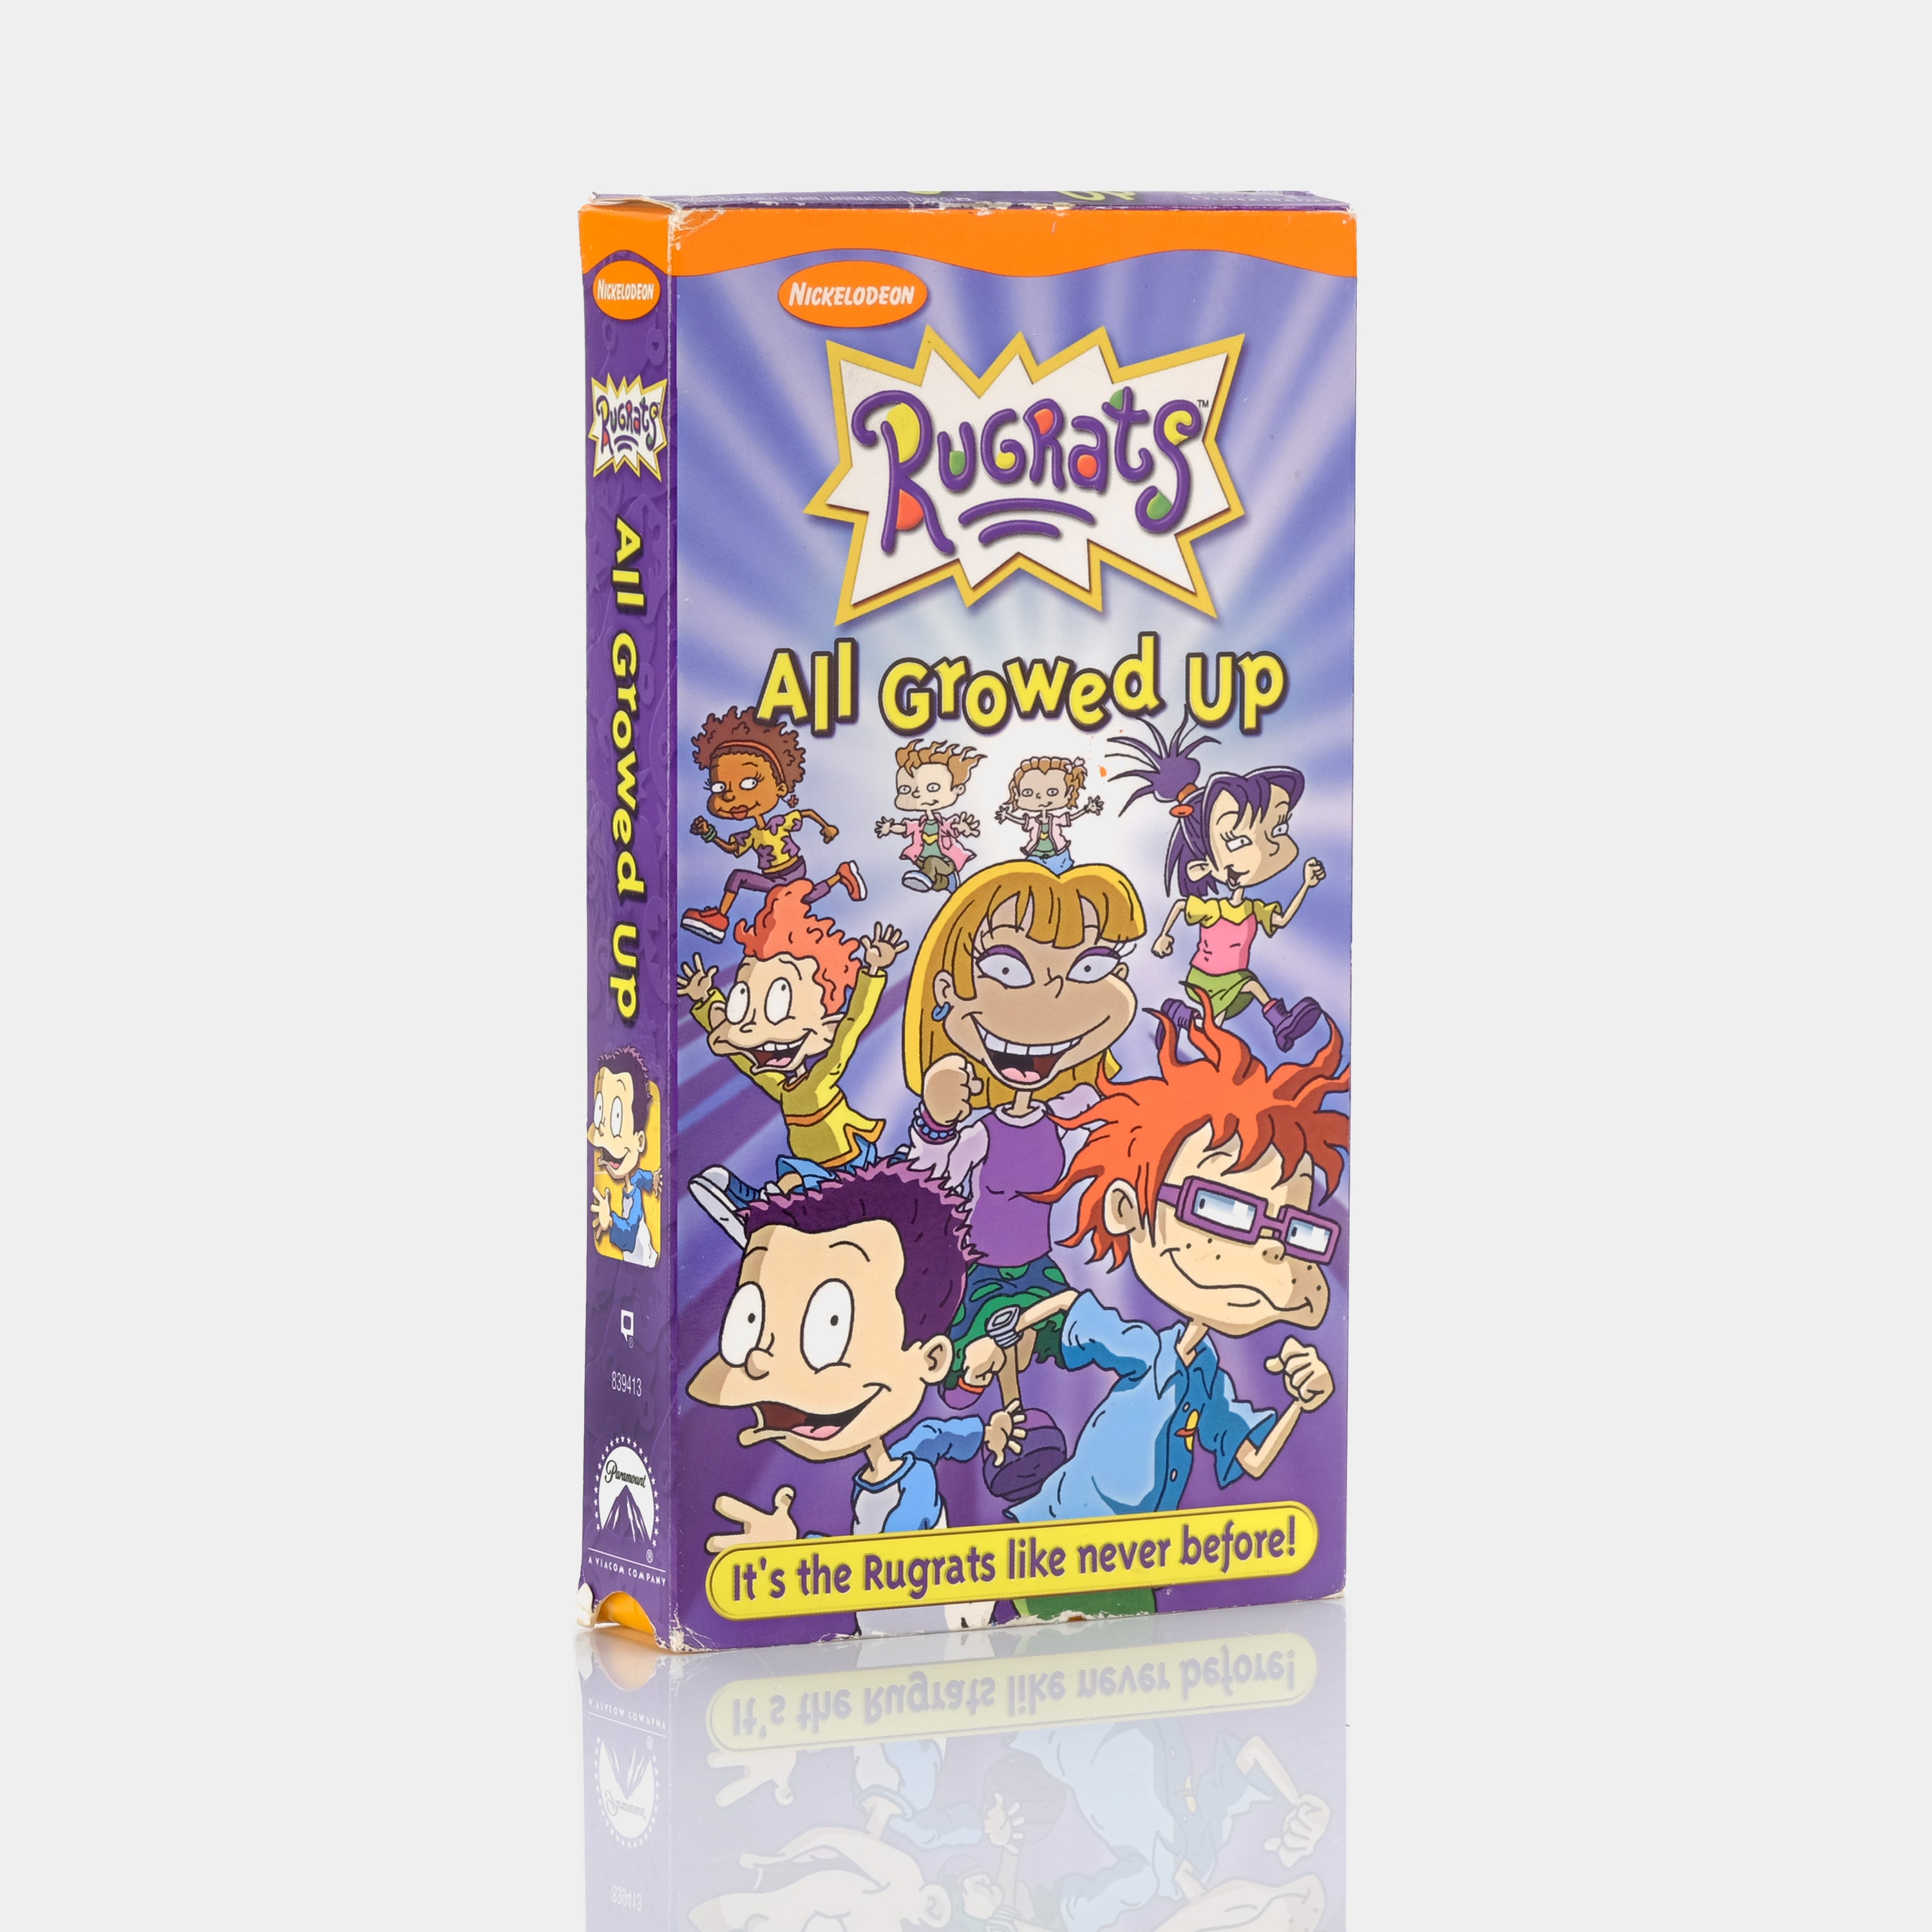 The Rugrats: All Growed Up VHS Tape